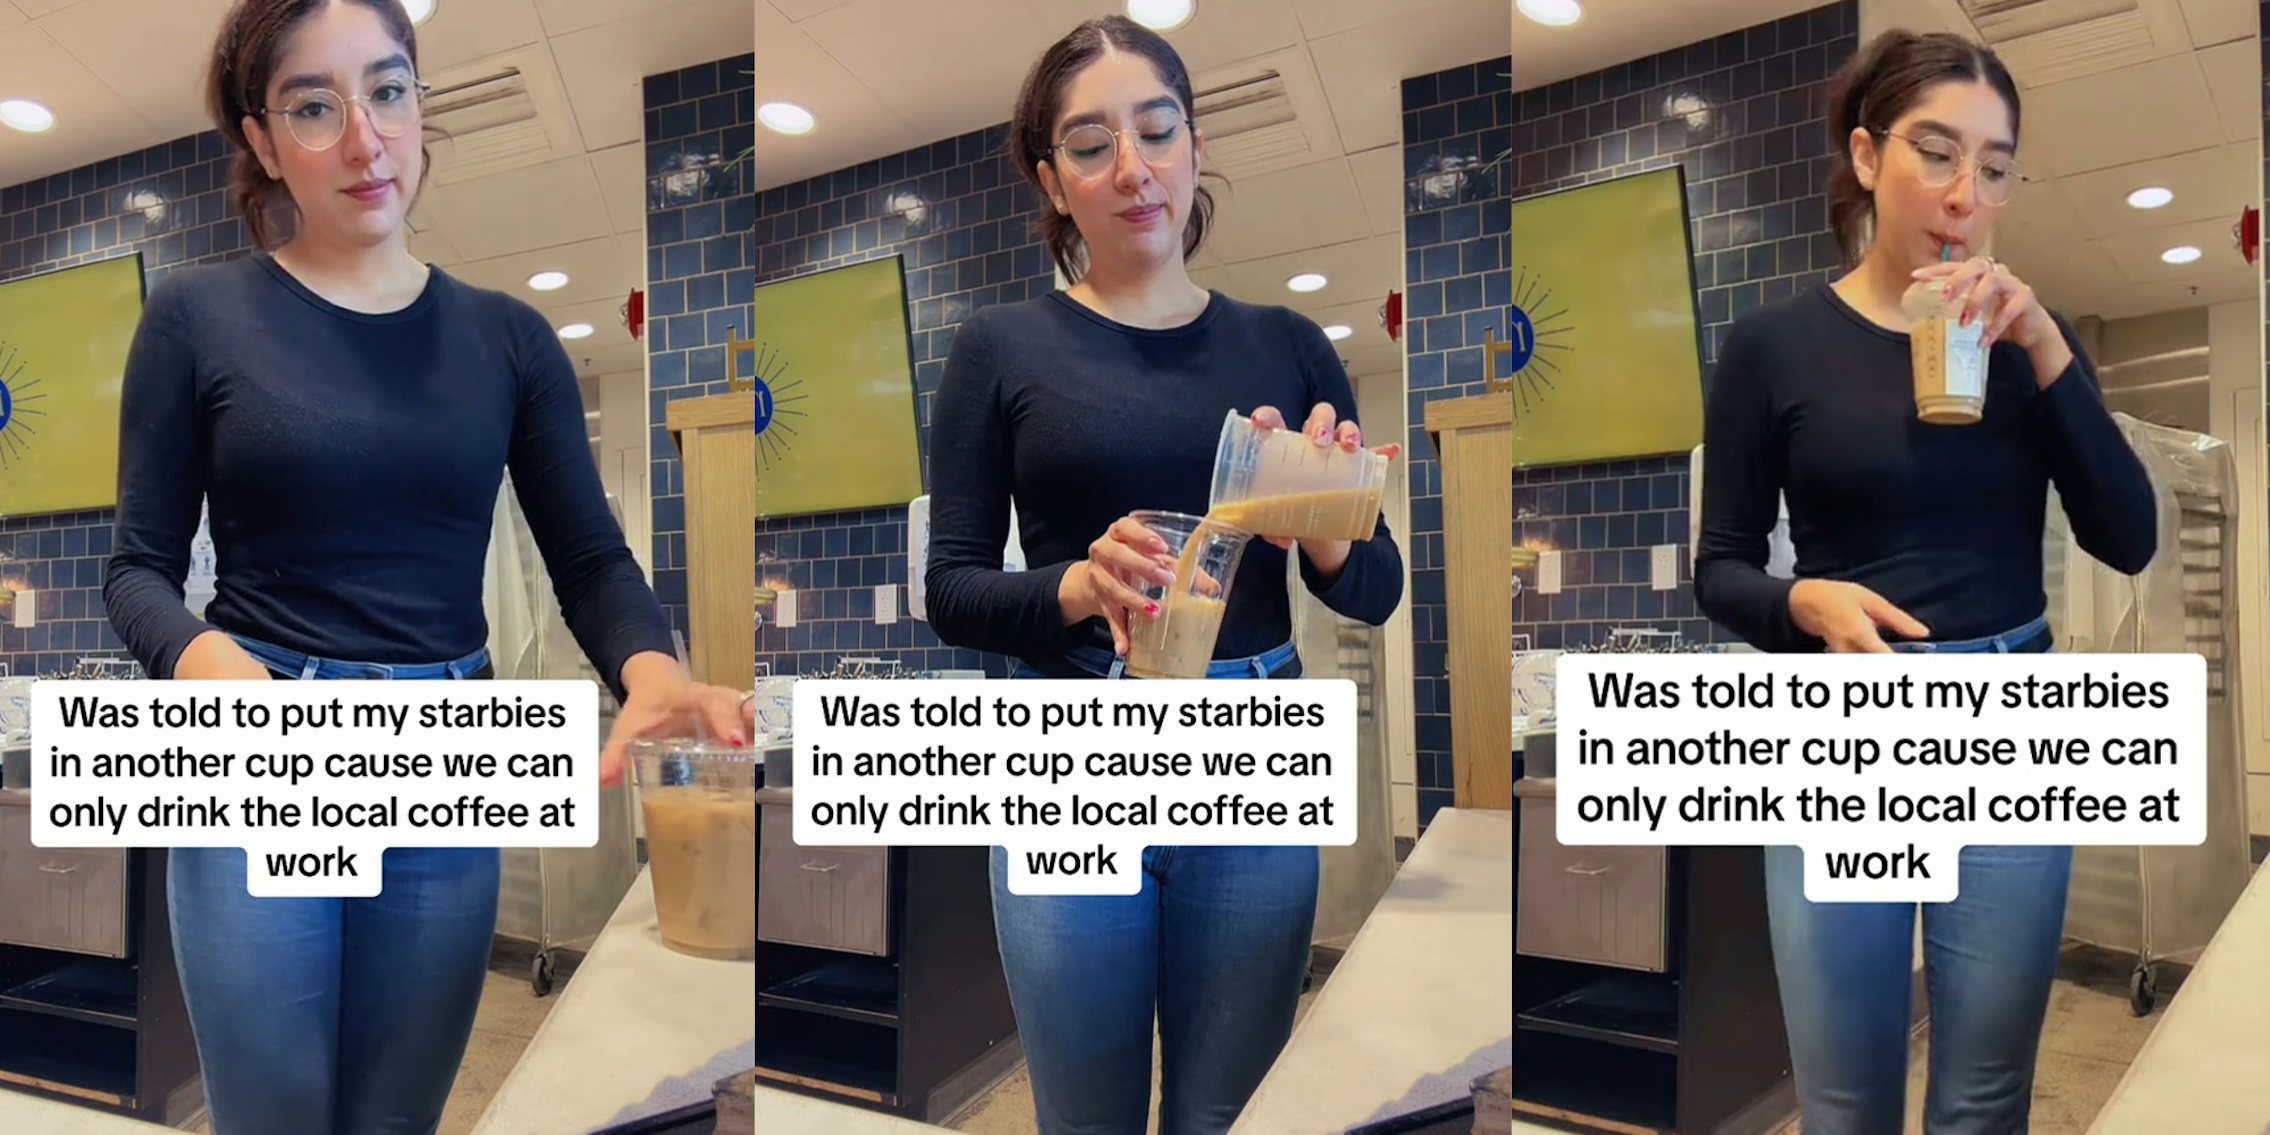 Local coffee shop barista says she’s not allowed to drink Starbucks, has to hide it in another cup